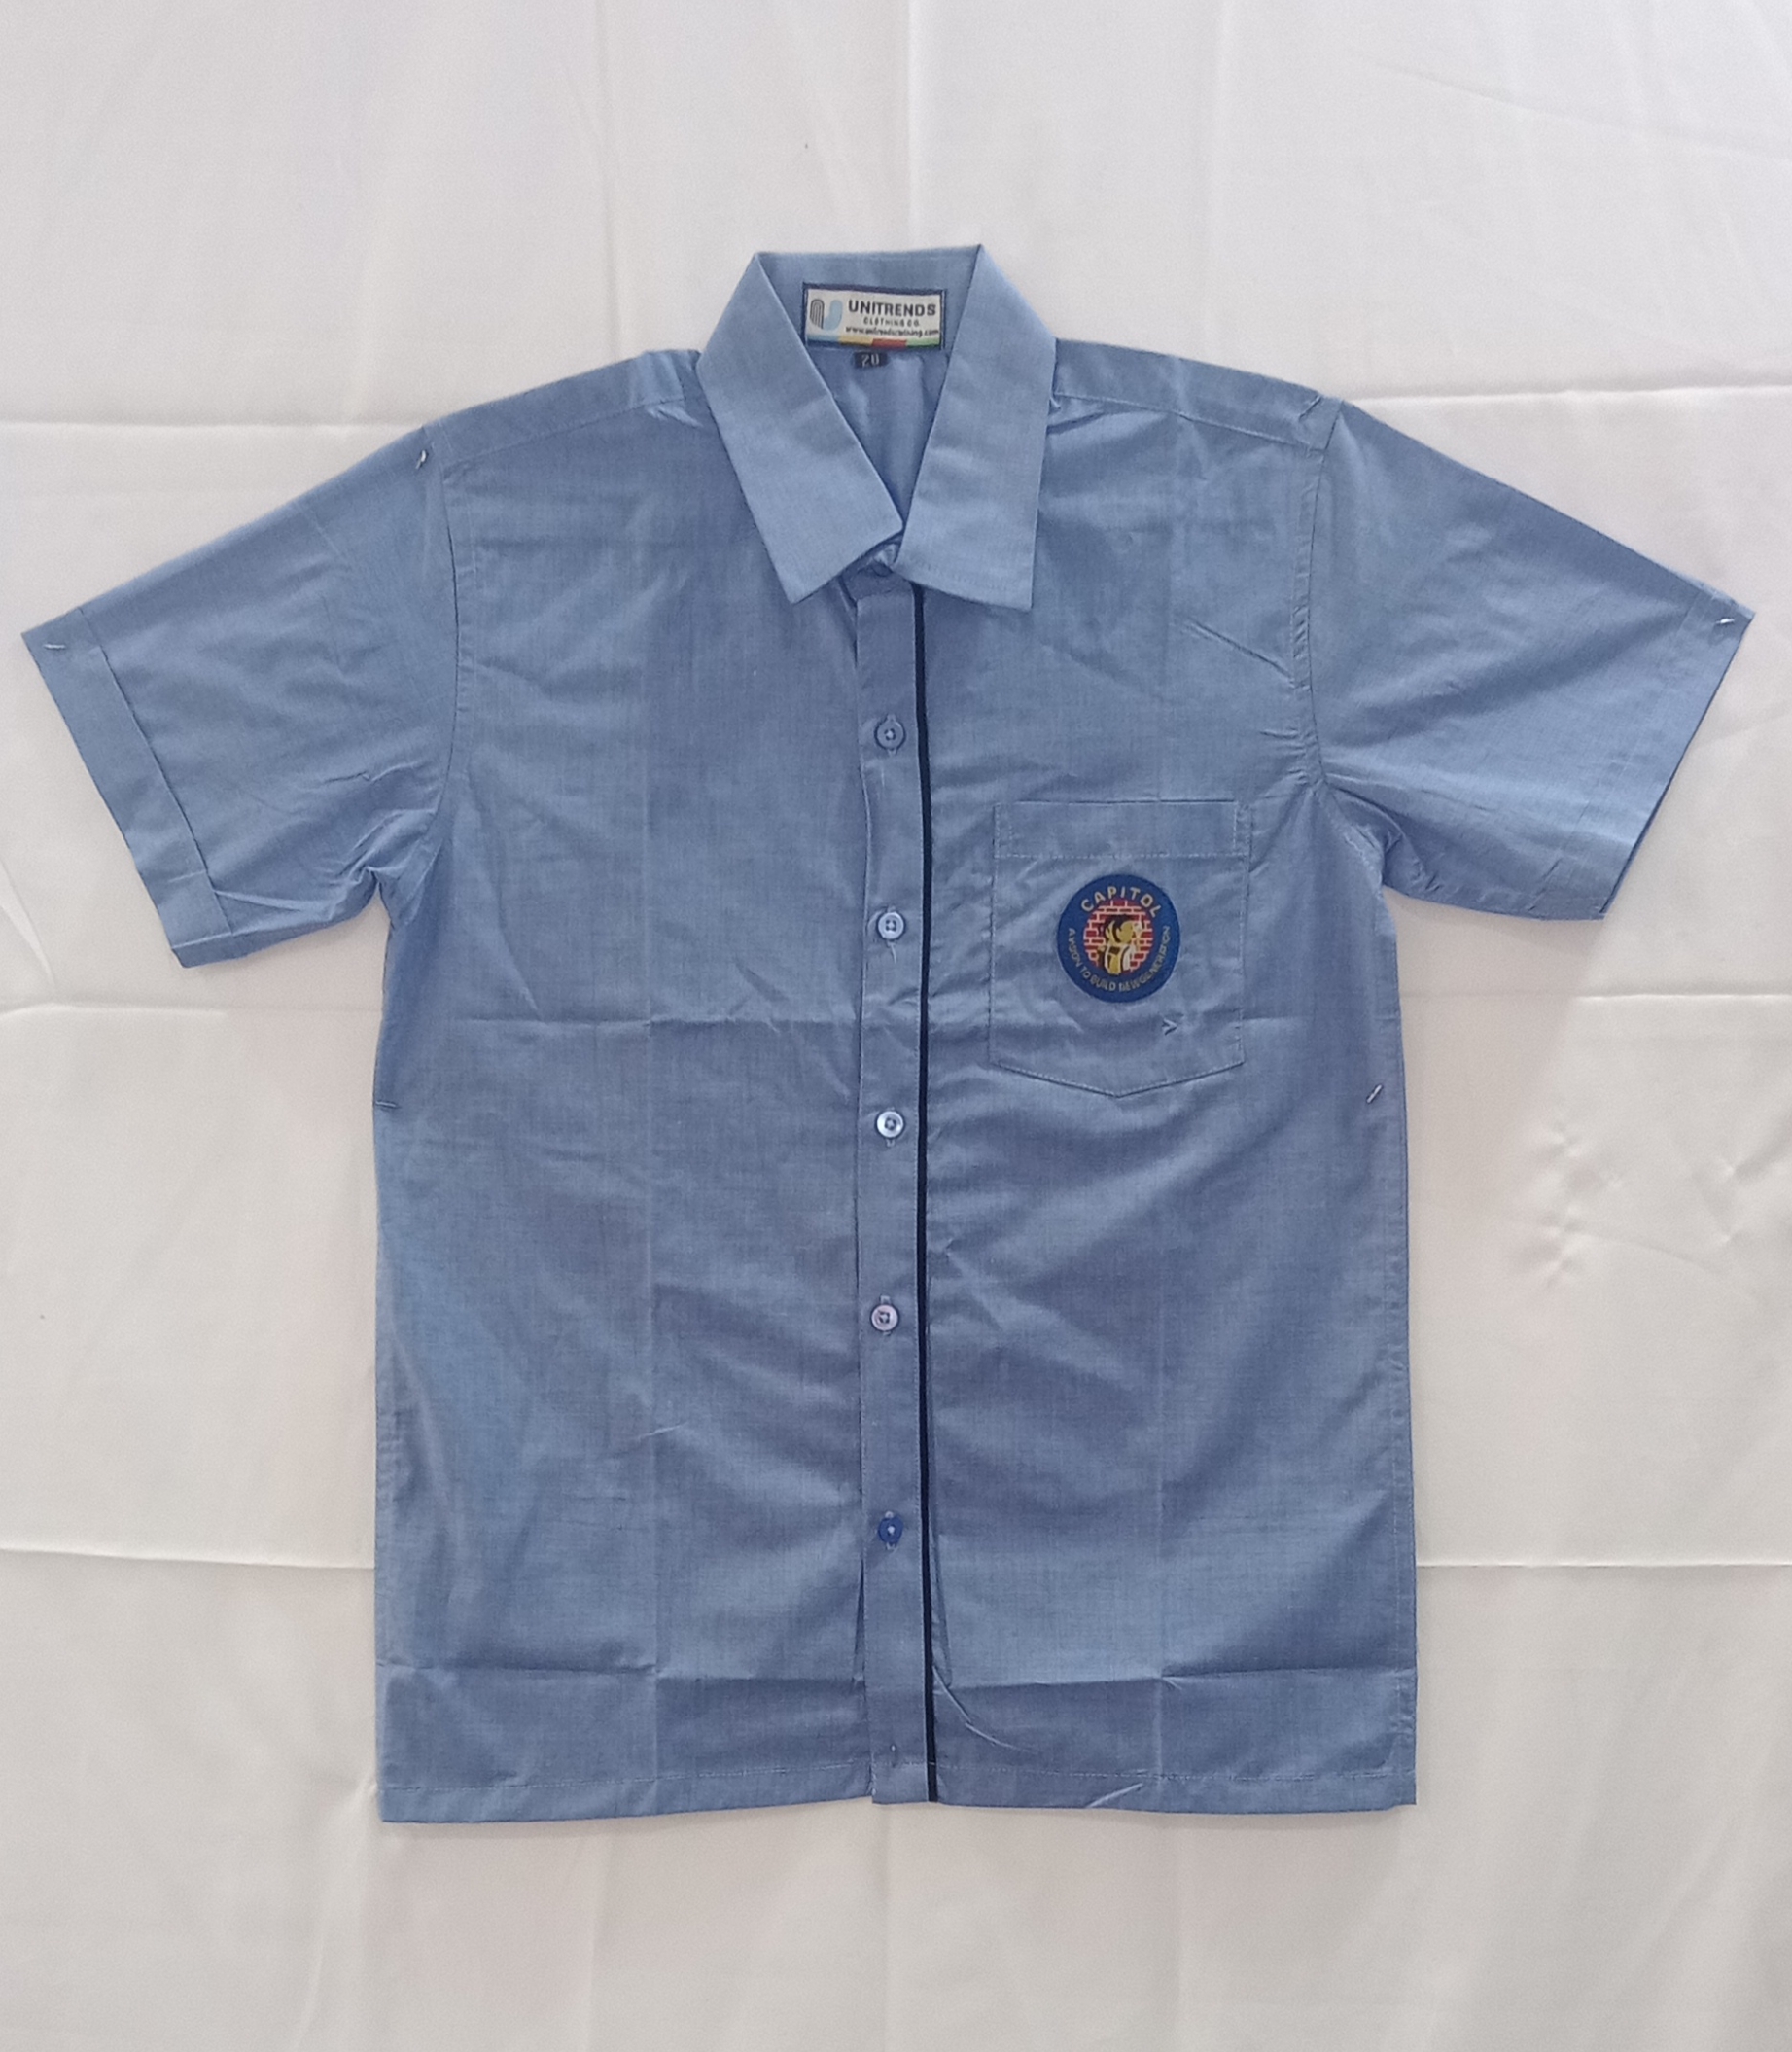 SHIRT PIPING – Unitrends Clothing